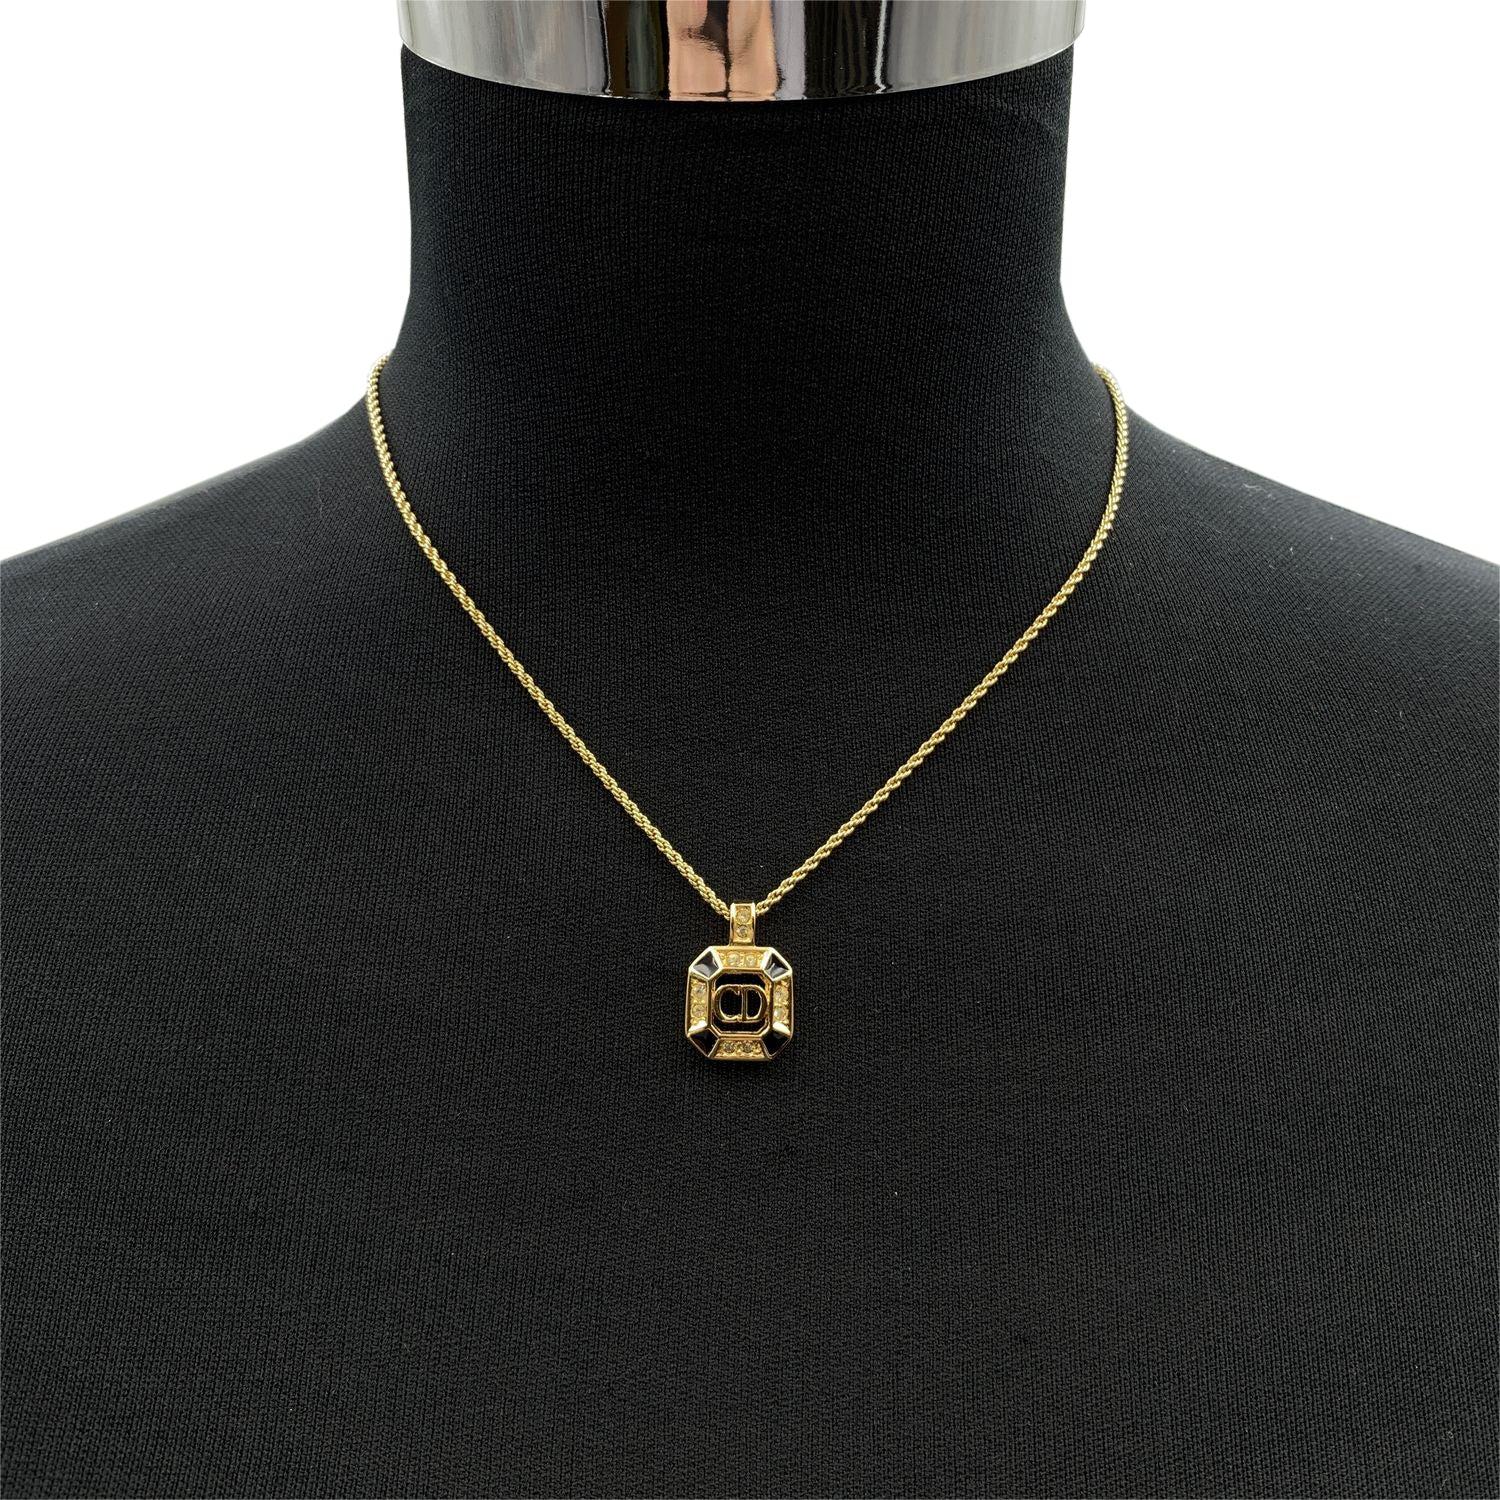 Vintage Christian Dior gold metal chain necklace with CD square logo pendant, embellished with small rhinestones and black enamel. Spring ring closure. Chain length: about 16.5 inches - 42 cm Condition A - EXCELLENT Gently used. Please, look